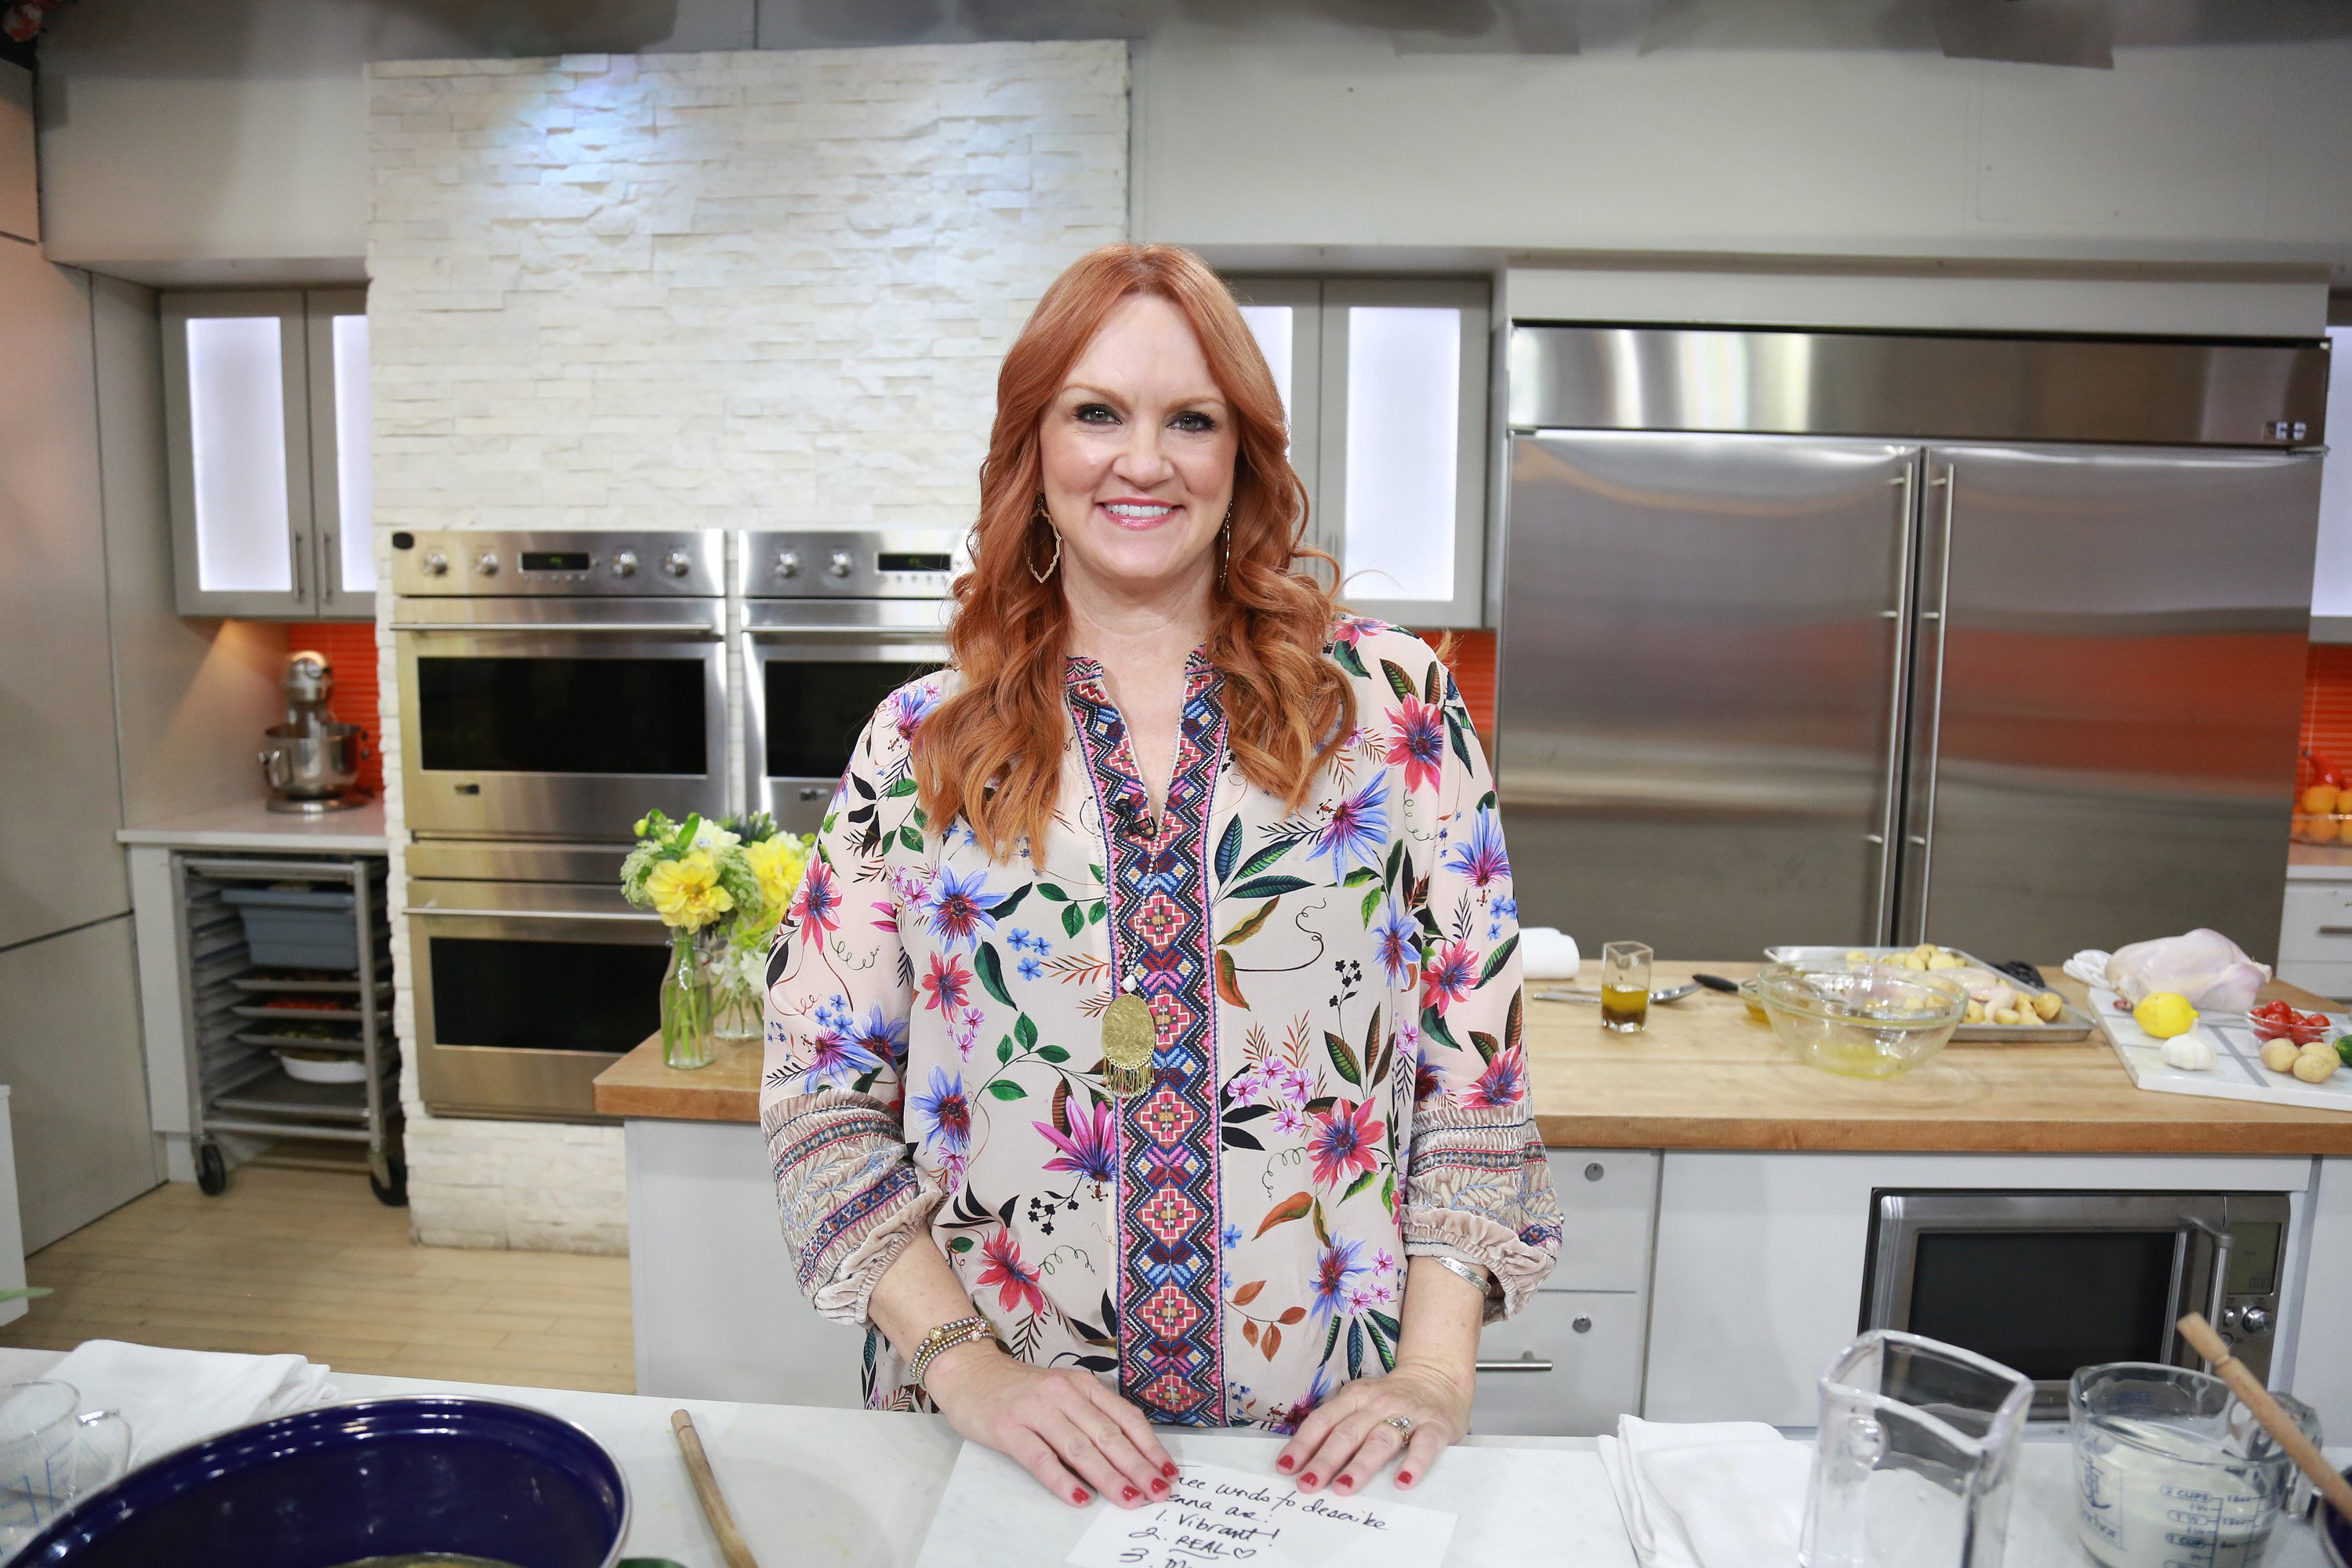 Ree Drummond poses on the 'Today' show in the kitchen.